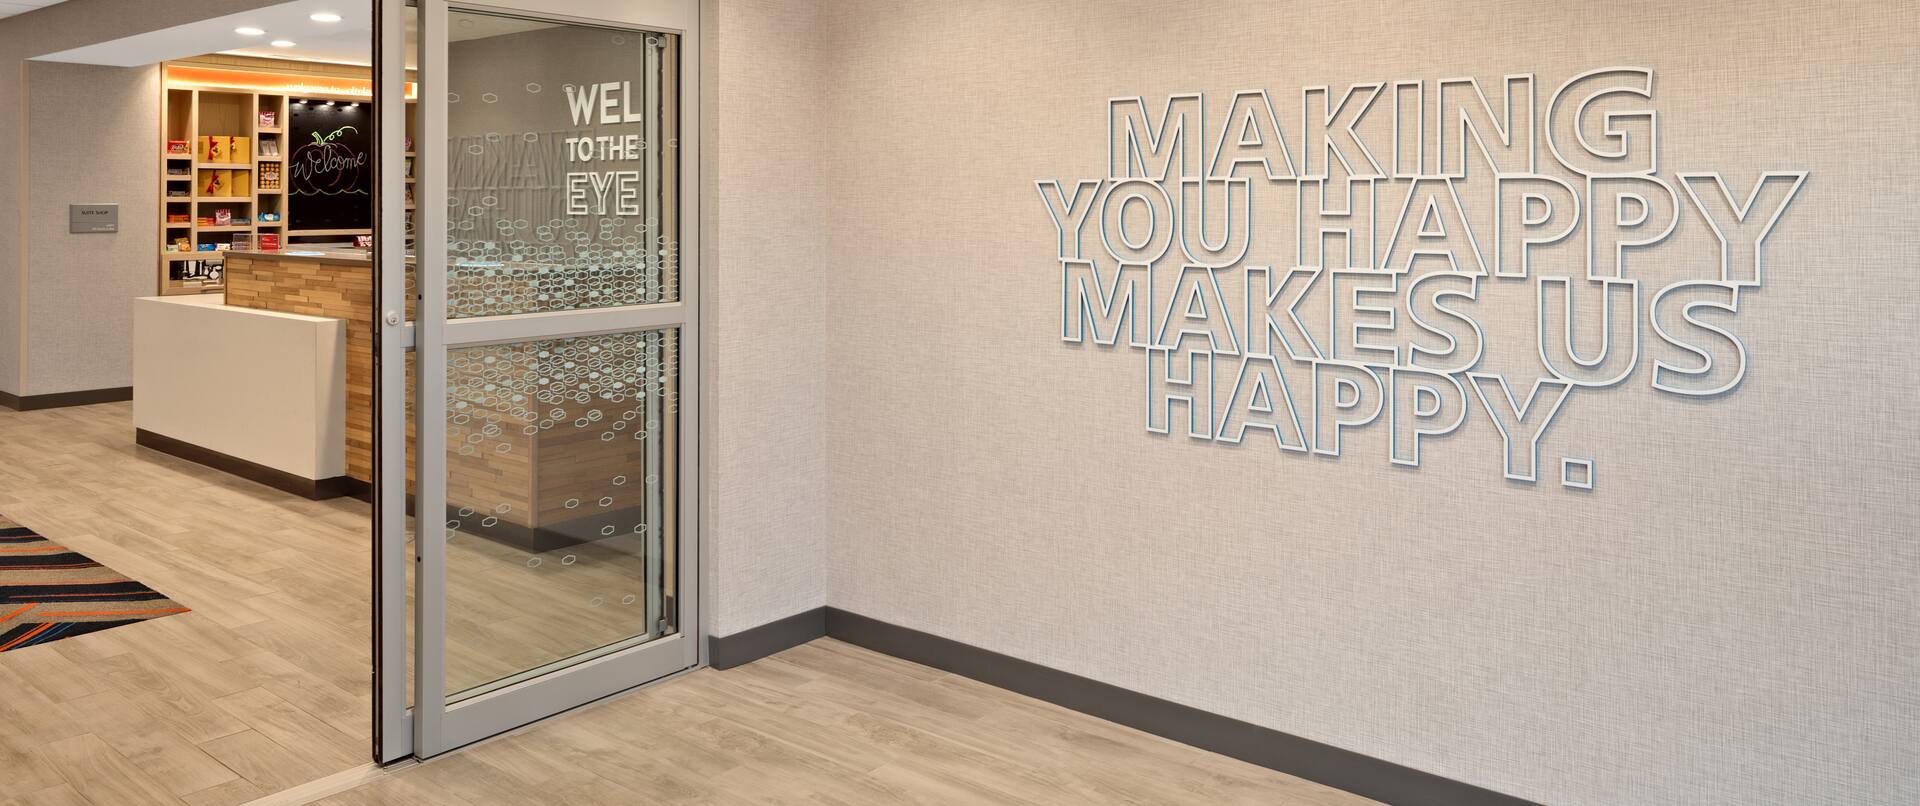 lobby entrance, hotel sign - making you happy makes us happy